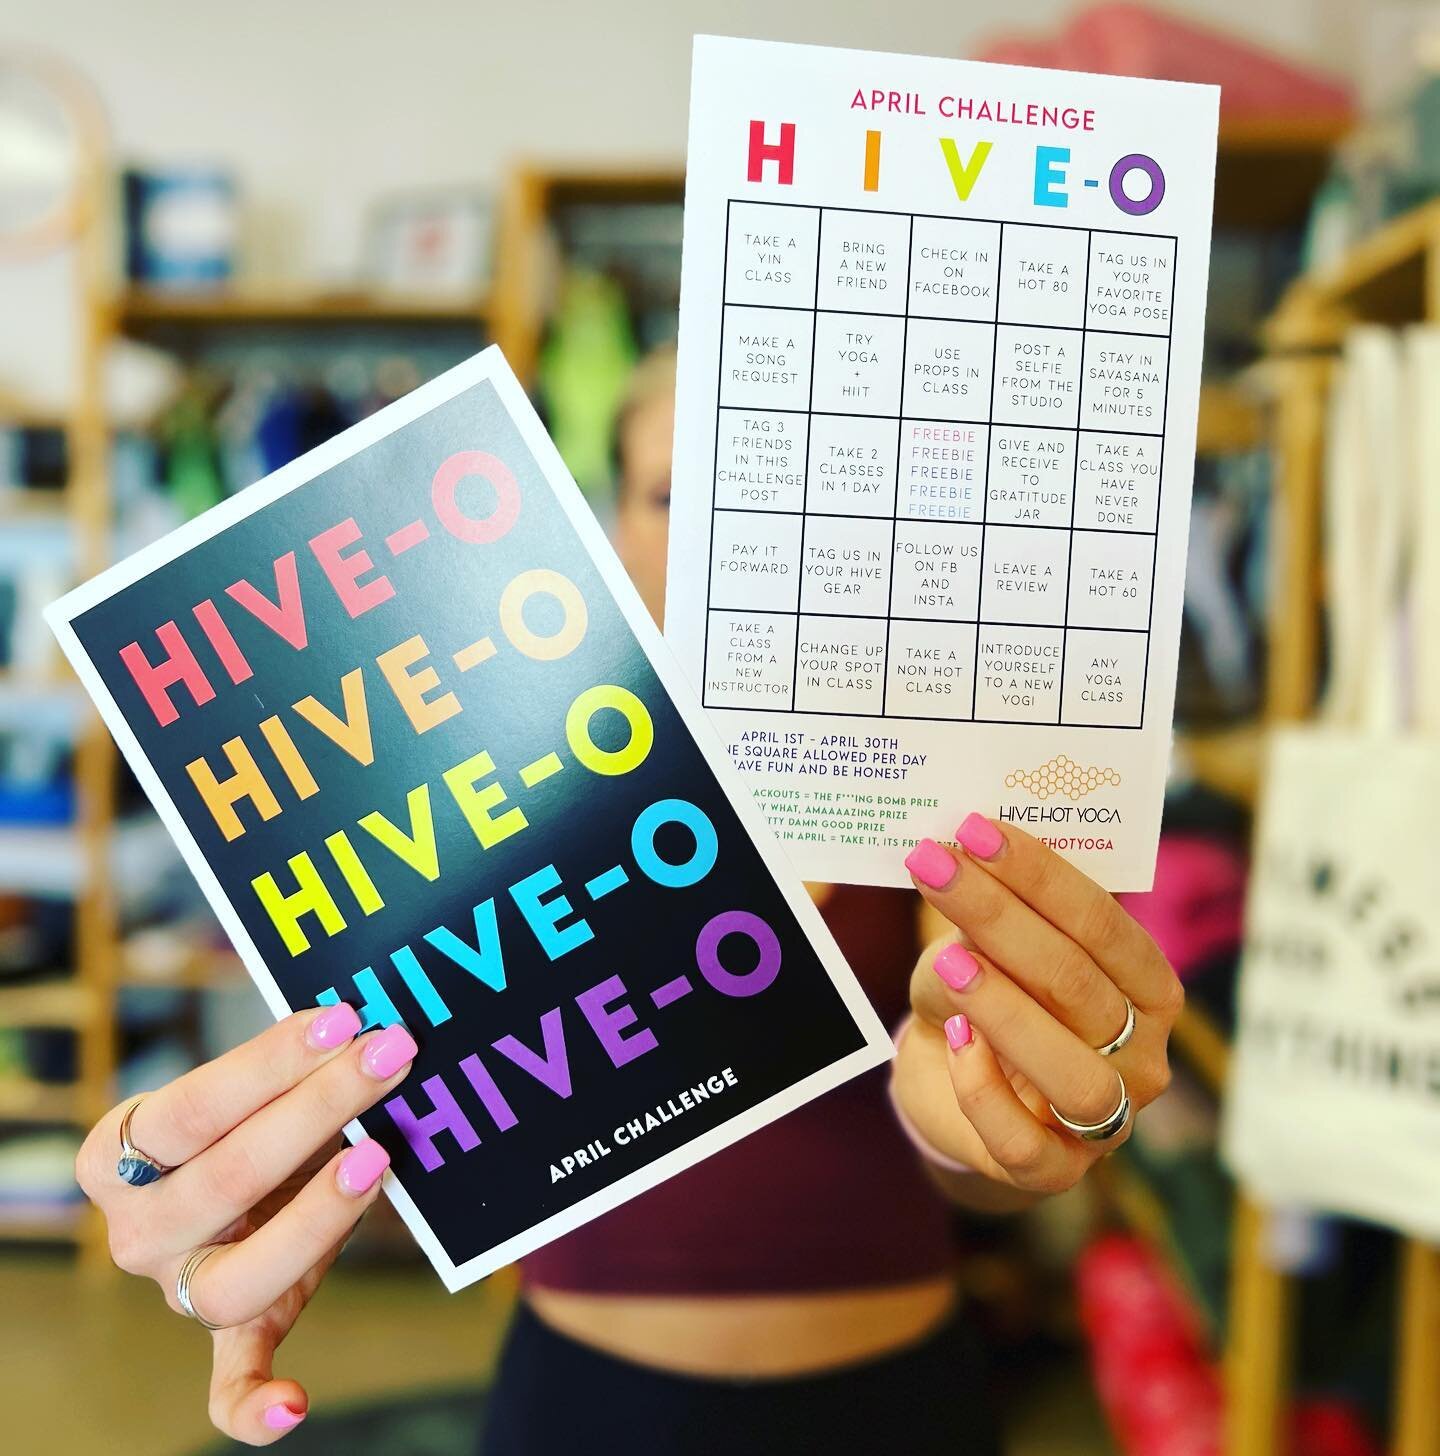 Spring is here, which means it&rsquo;s time for another yoga challenge!!

🌸☀️🌸☀️🌸☀️🌸☀️

H I V E - O (bingo)
It&rsquo;s simple!

&bull; April 1st - 30th
&bull; One Square Per Day
&bull; Be Honest
&bull; Have Fun
&bull; Win Prizes

$1 or more CASH 